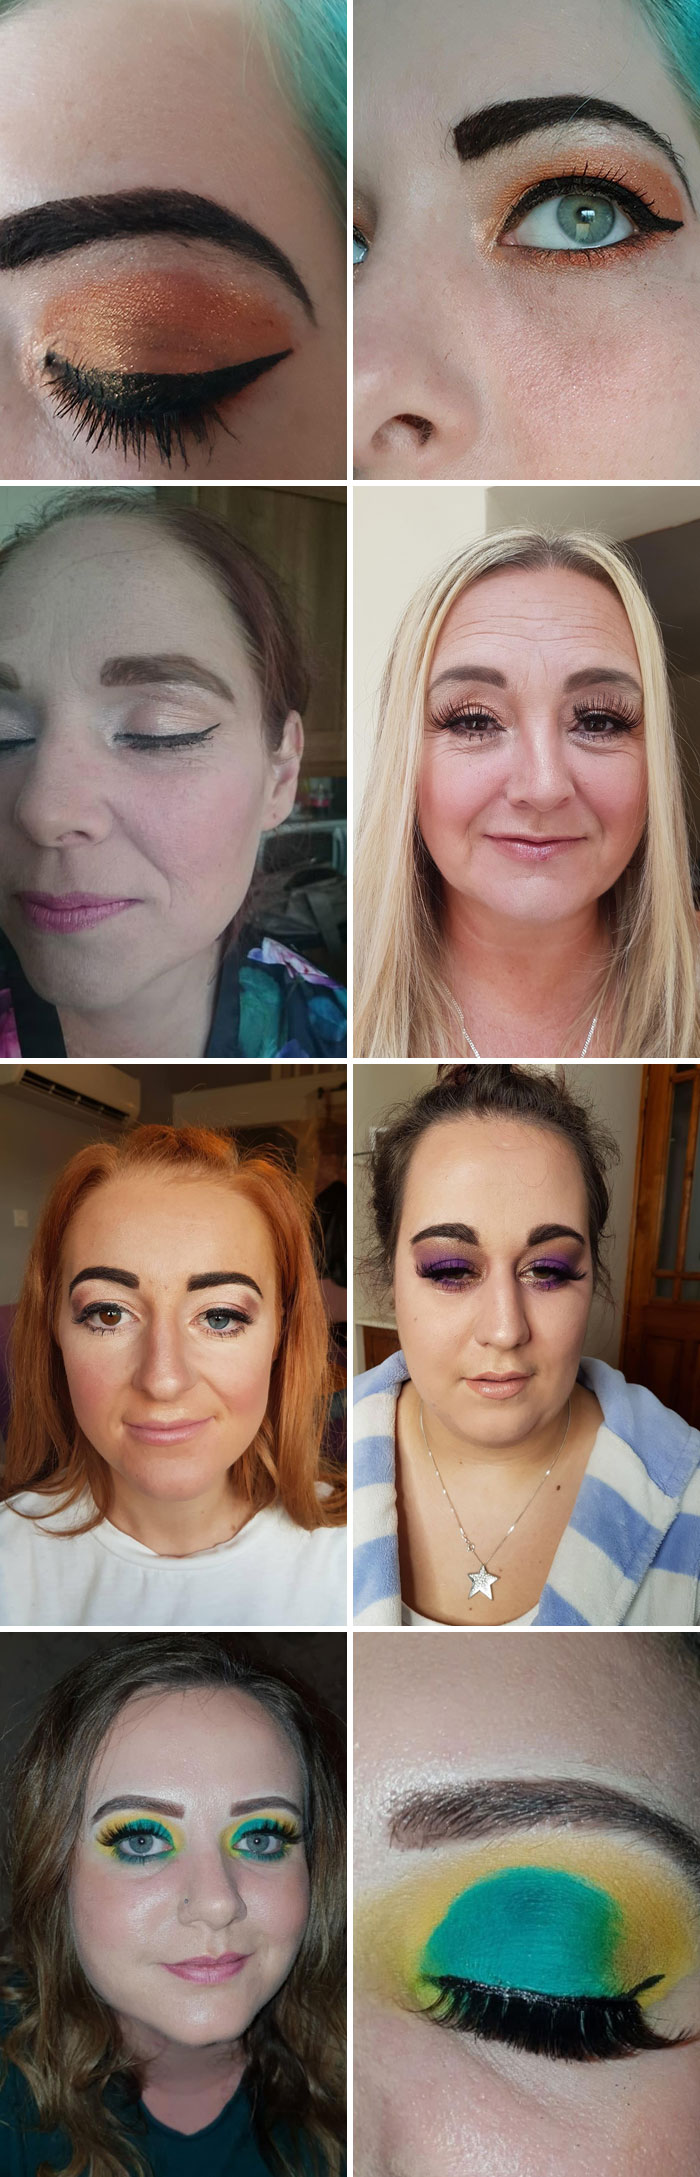 More Of That Local Makeup Artist Near Me, It’s The Brows, Foundation And Lack Of Blending That Gets Me